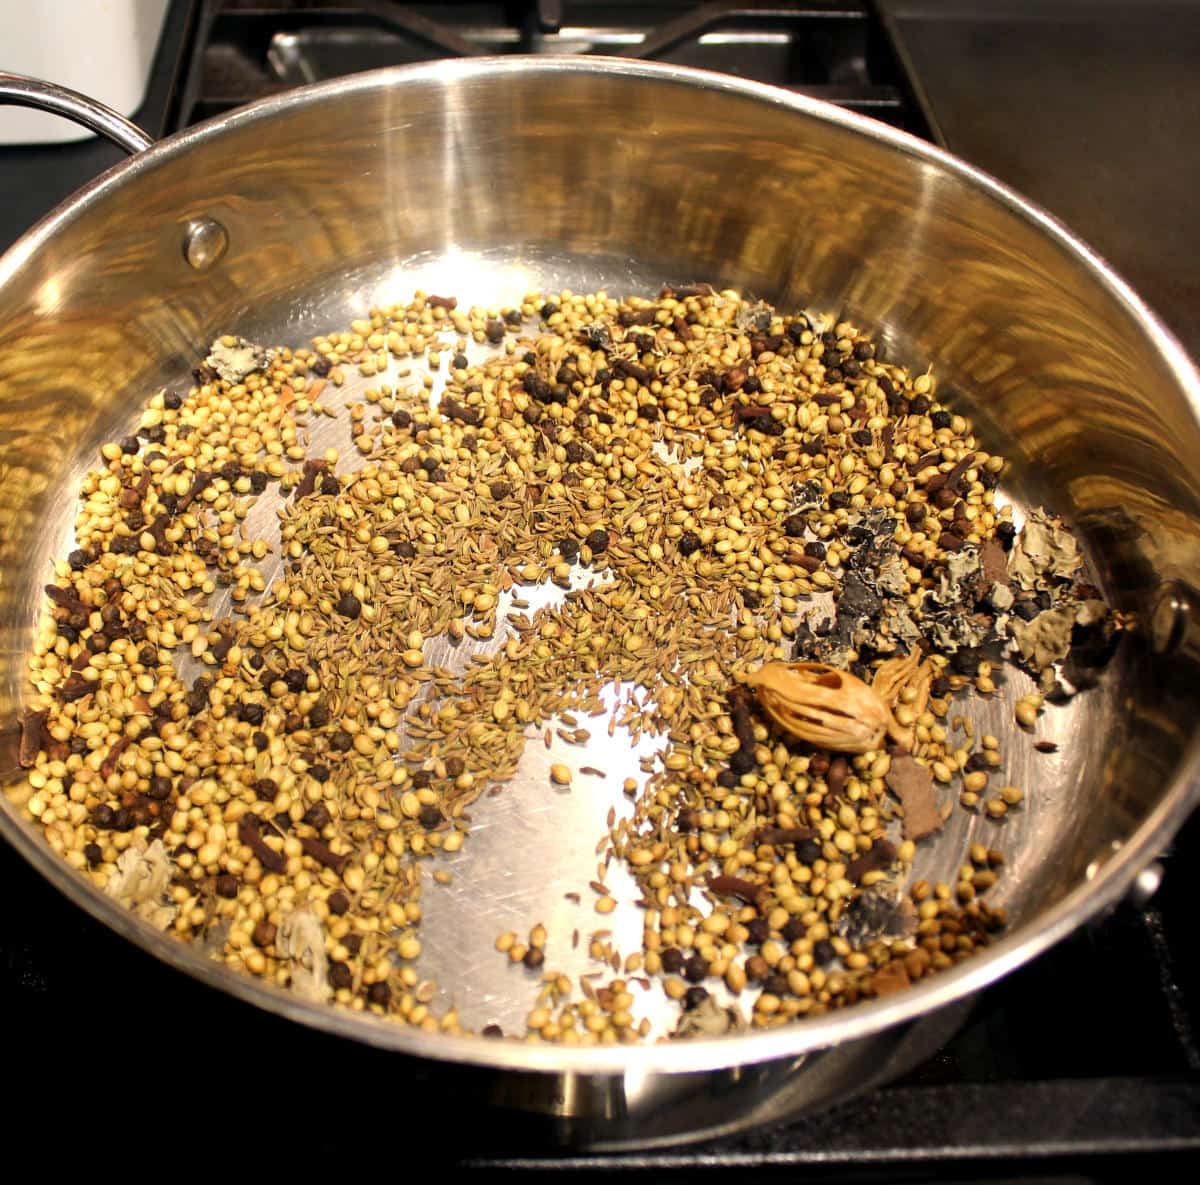 Fennel seeds, mace, coriander seeds, cumin seeds, stone flower and peppercorns roasting in a skillet.